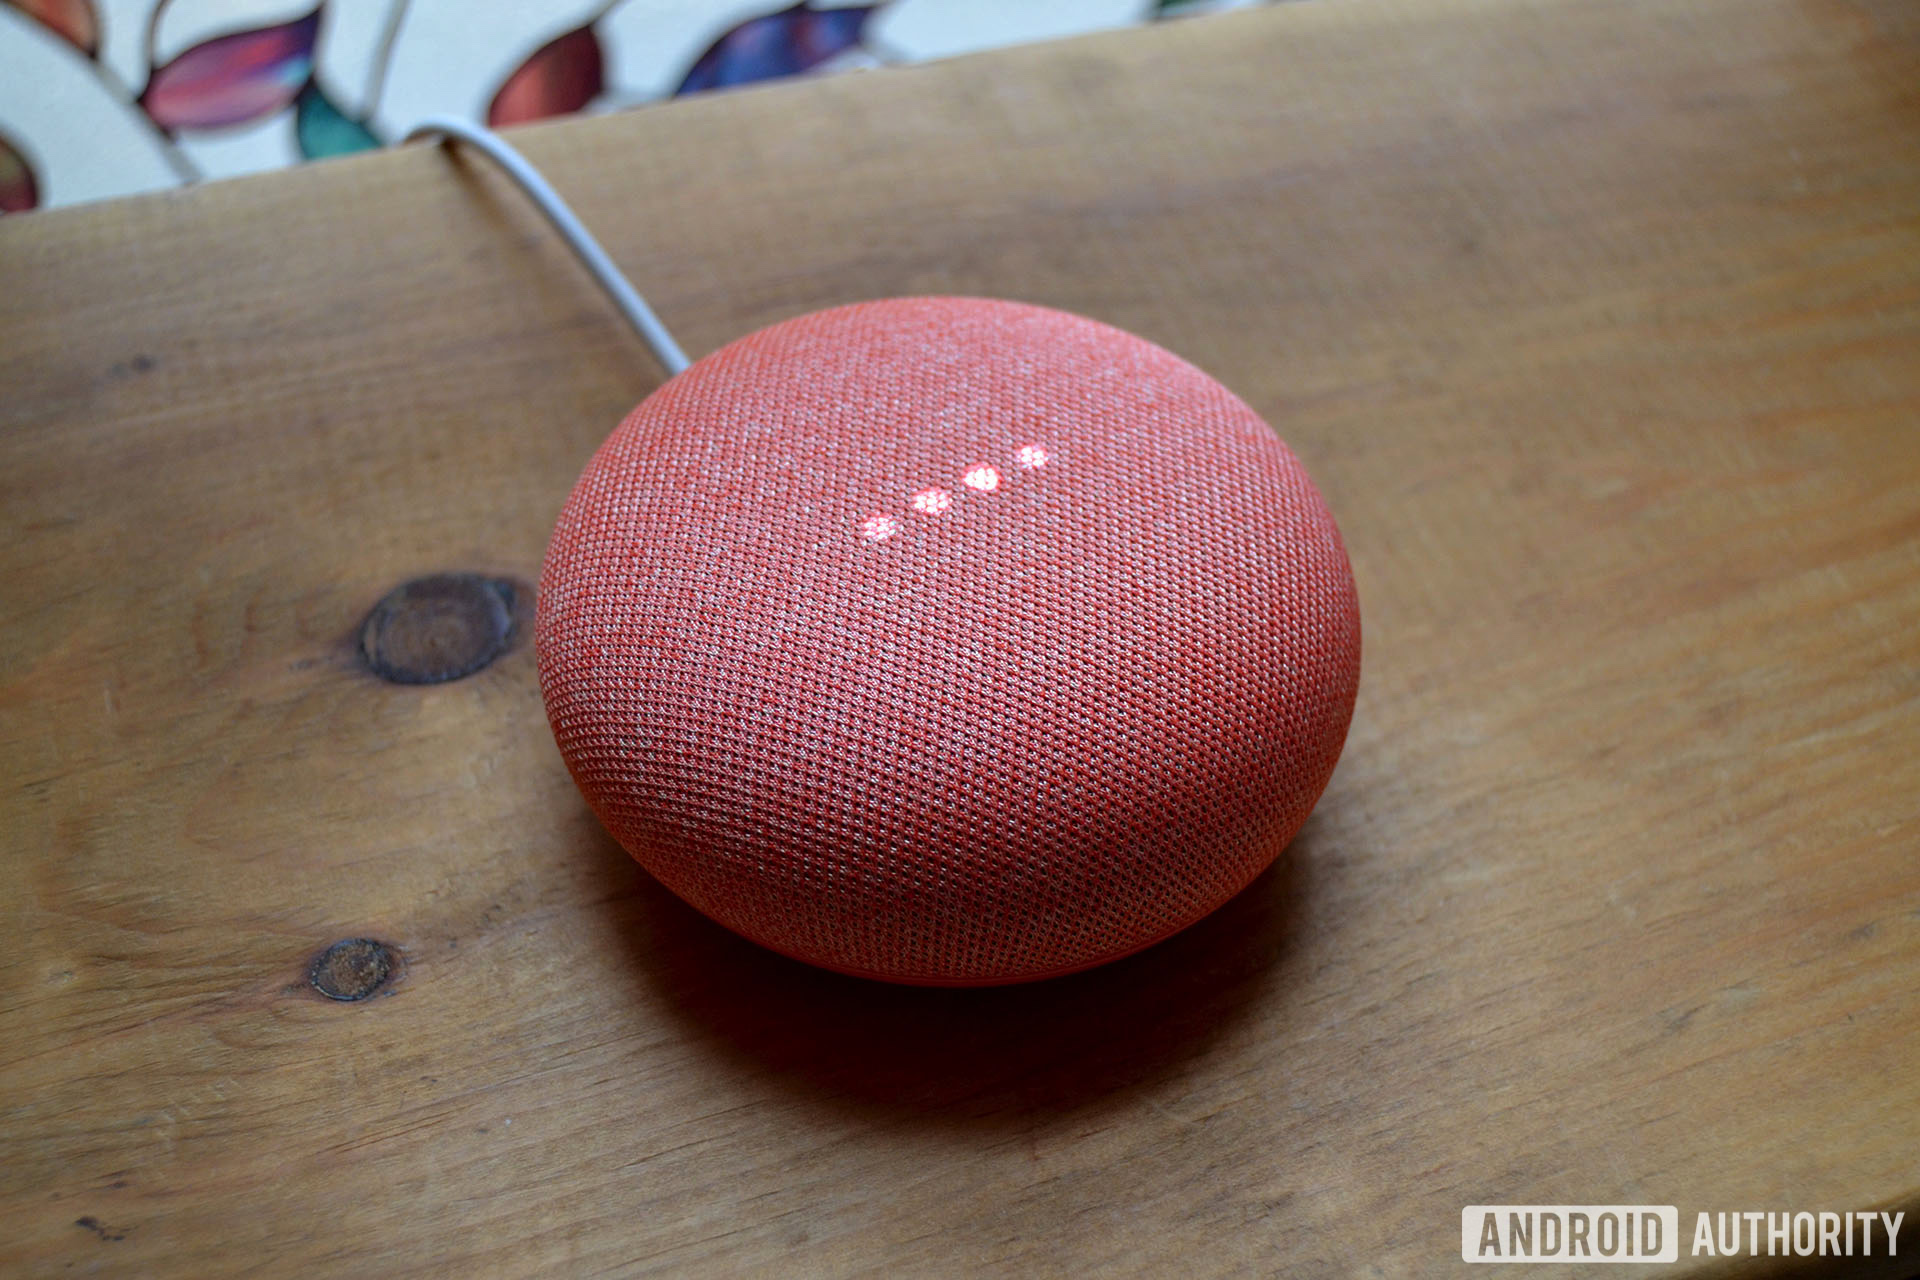 https://www.androidauthority.com/wp-content/uploads/2017/12/Google-Home-Mini-Coral-AA-1.jpg